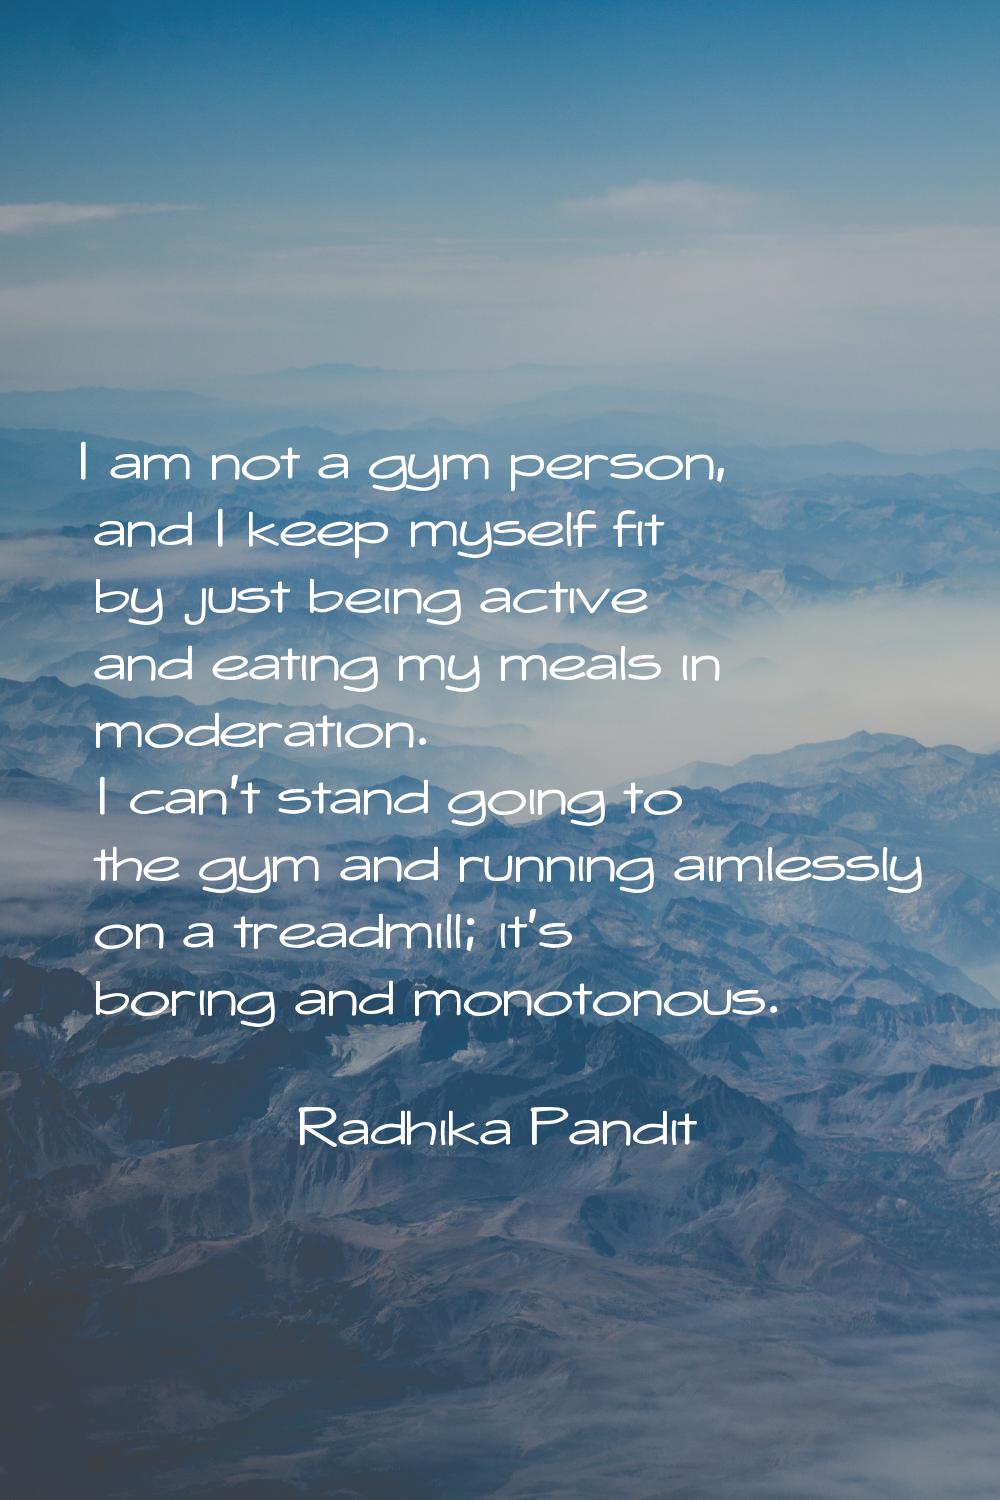 I am not a gym person, and I keep myself fit by just being active and eating my meals in moderation